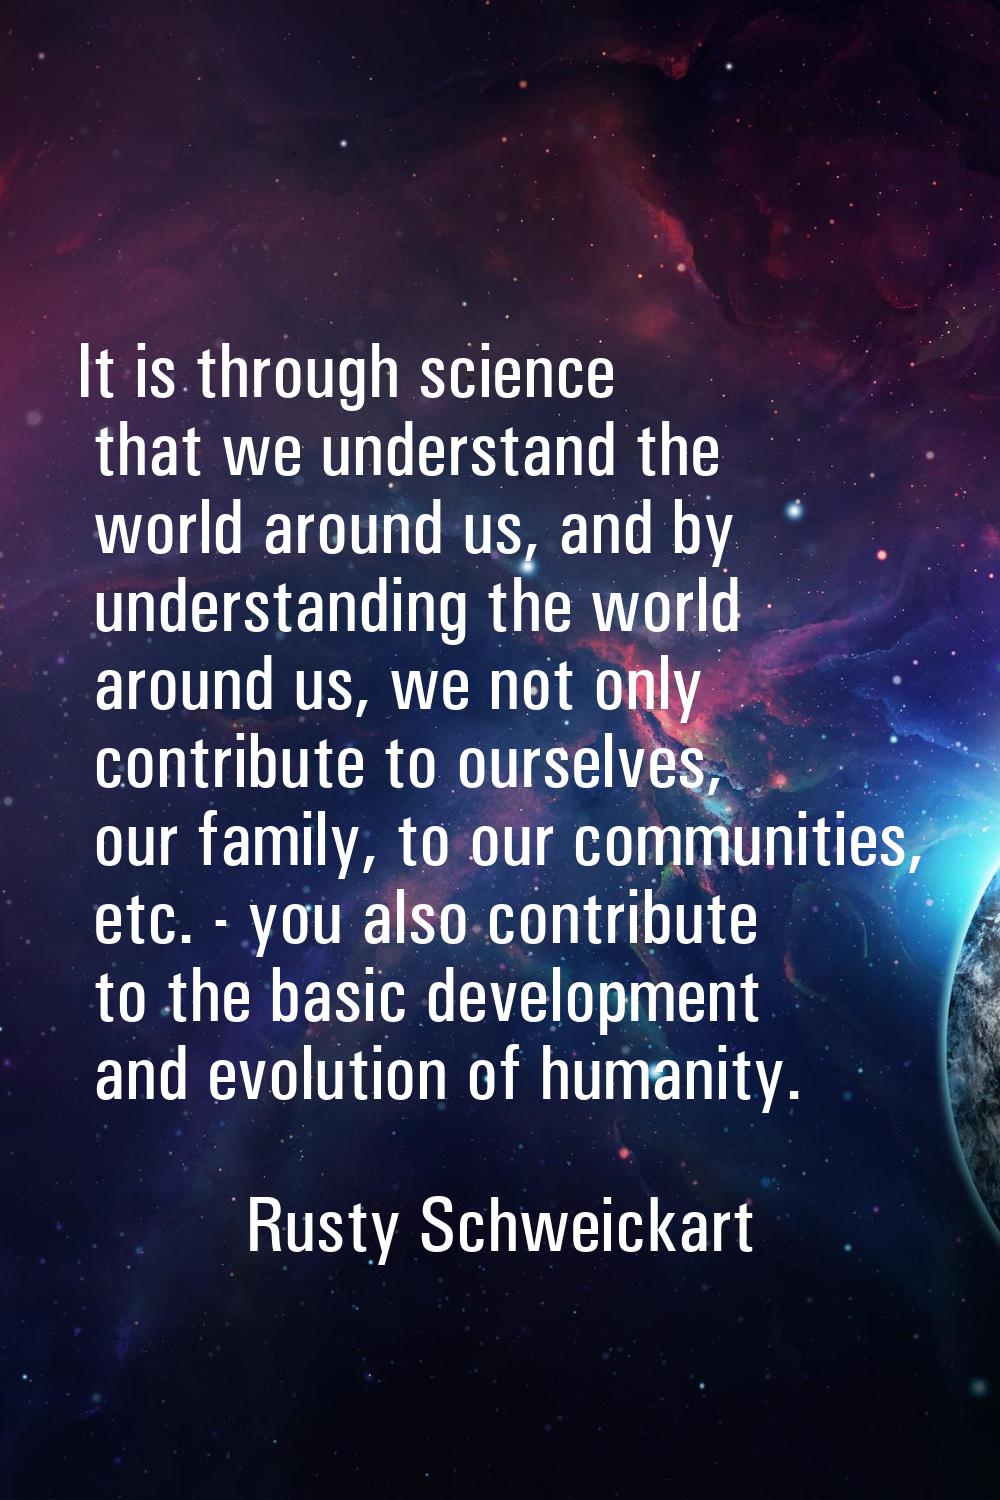 It is through science that we understand the world around us, and by understanding the world around